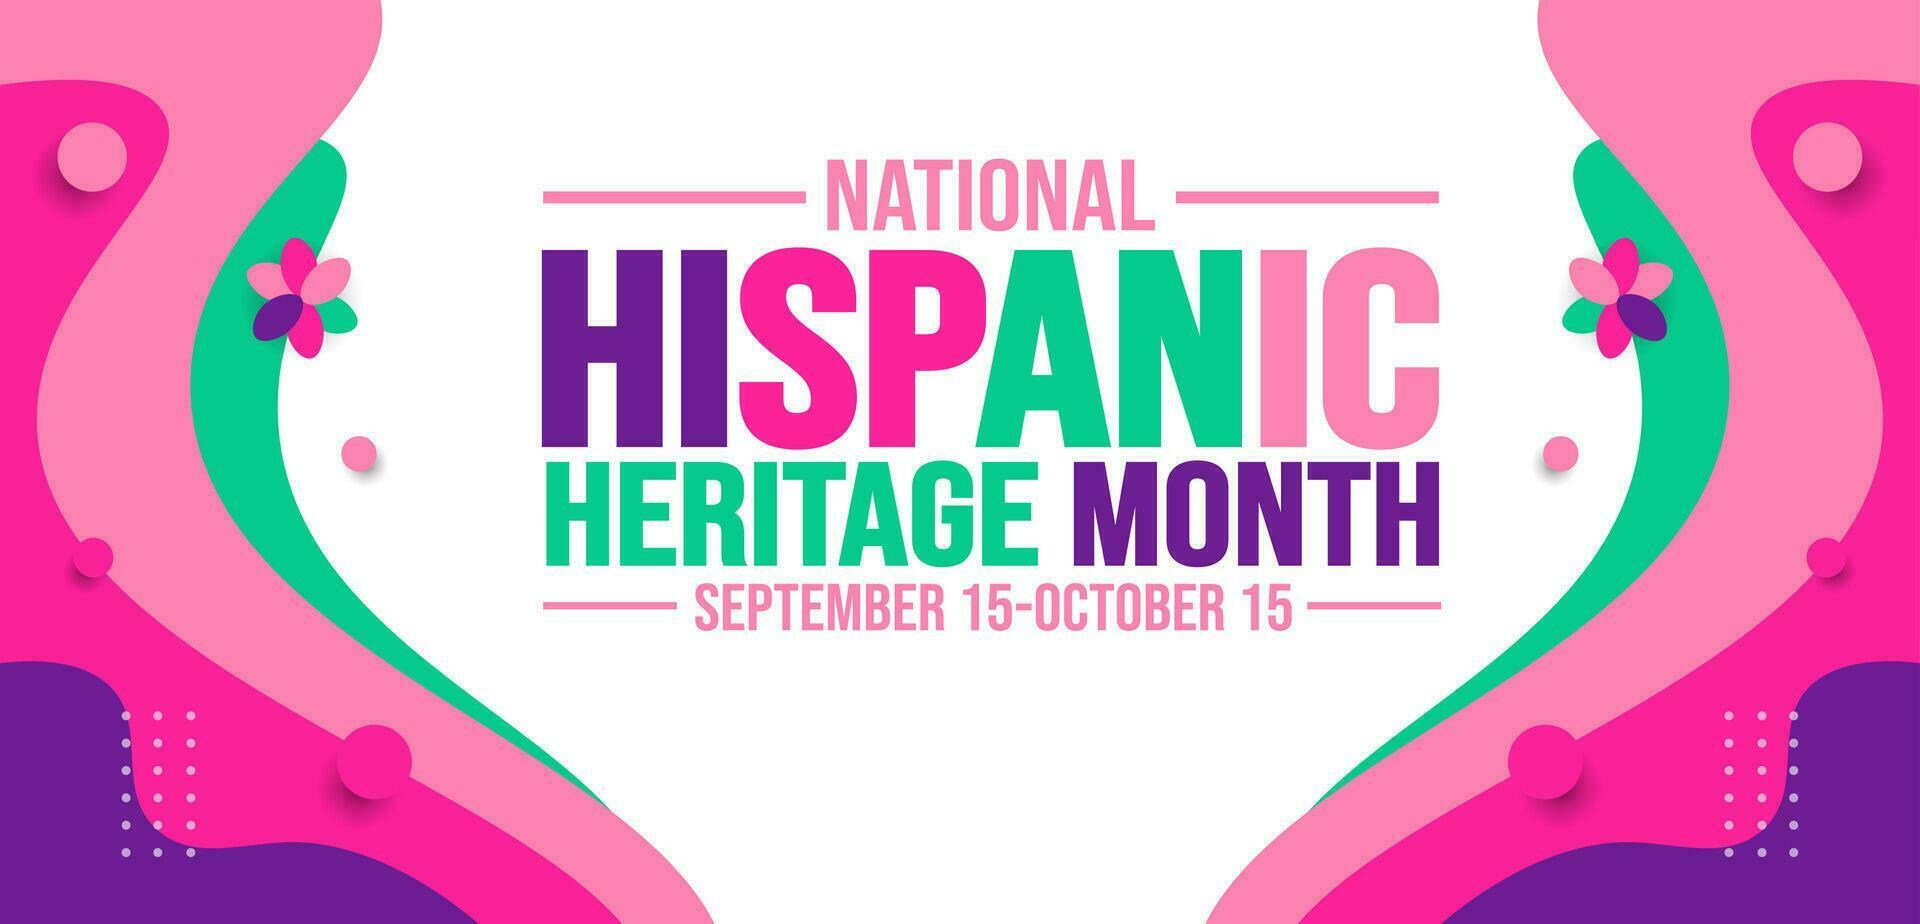 National Hispanic Heritage Month celebration colorful background, typography, banner, placard, card, and poster design template. is annually celebrated from September 15 to October 15 in the USA. vector